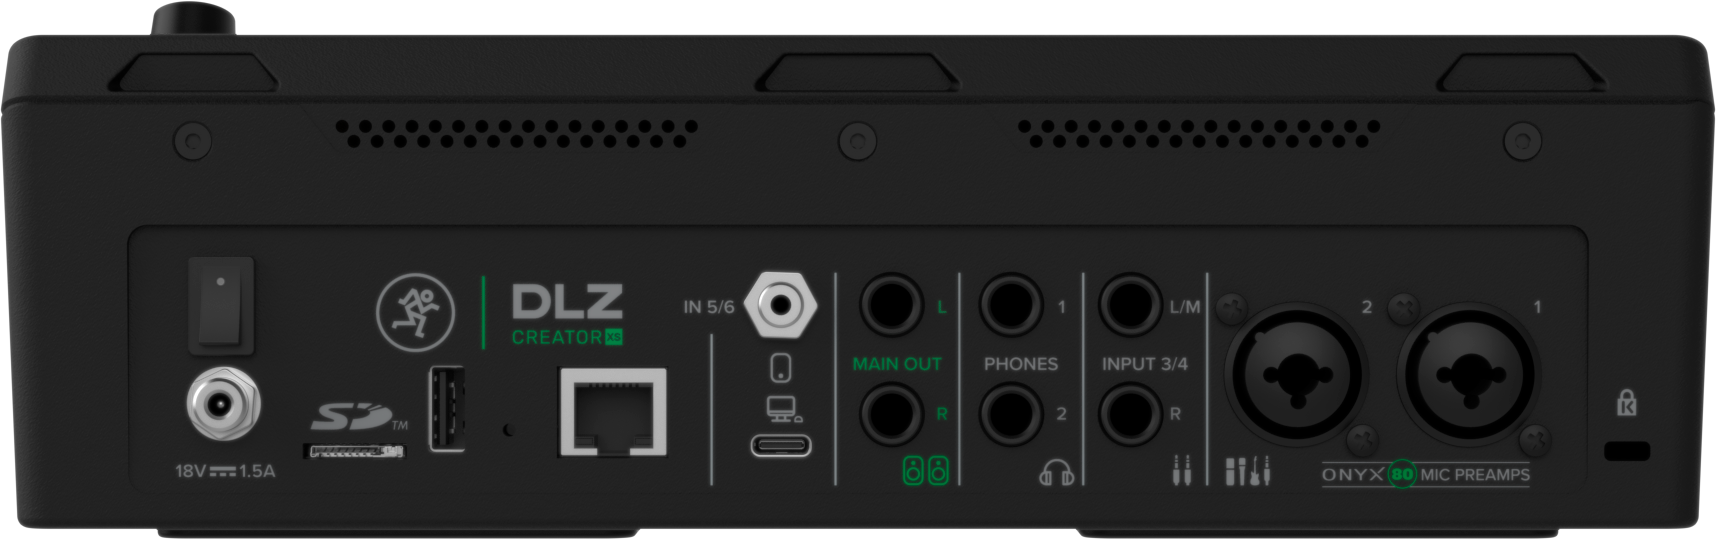 Mackie DLZ CREATOR XS  Compact Adaptative Digital Mixer for Podcasting and Streaming